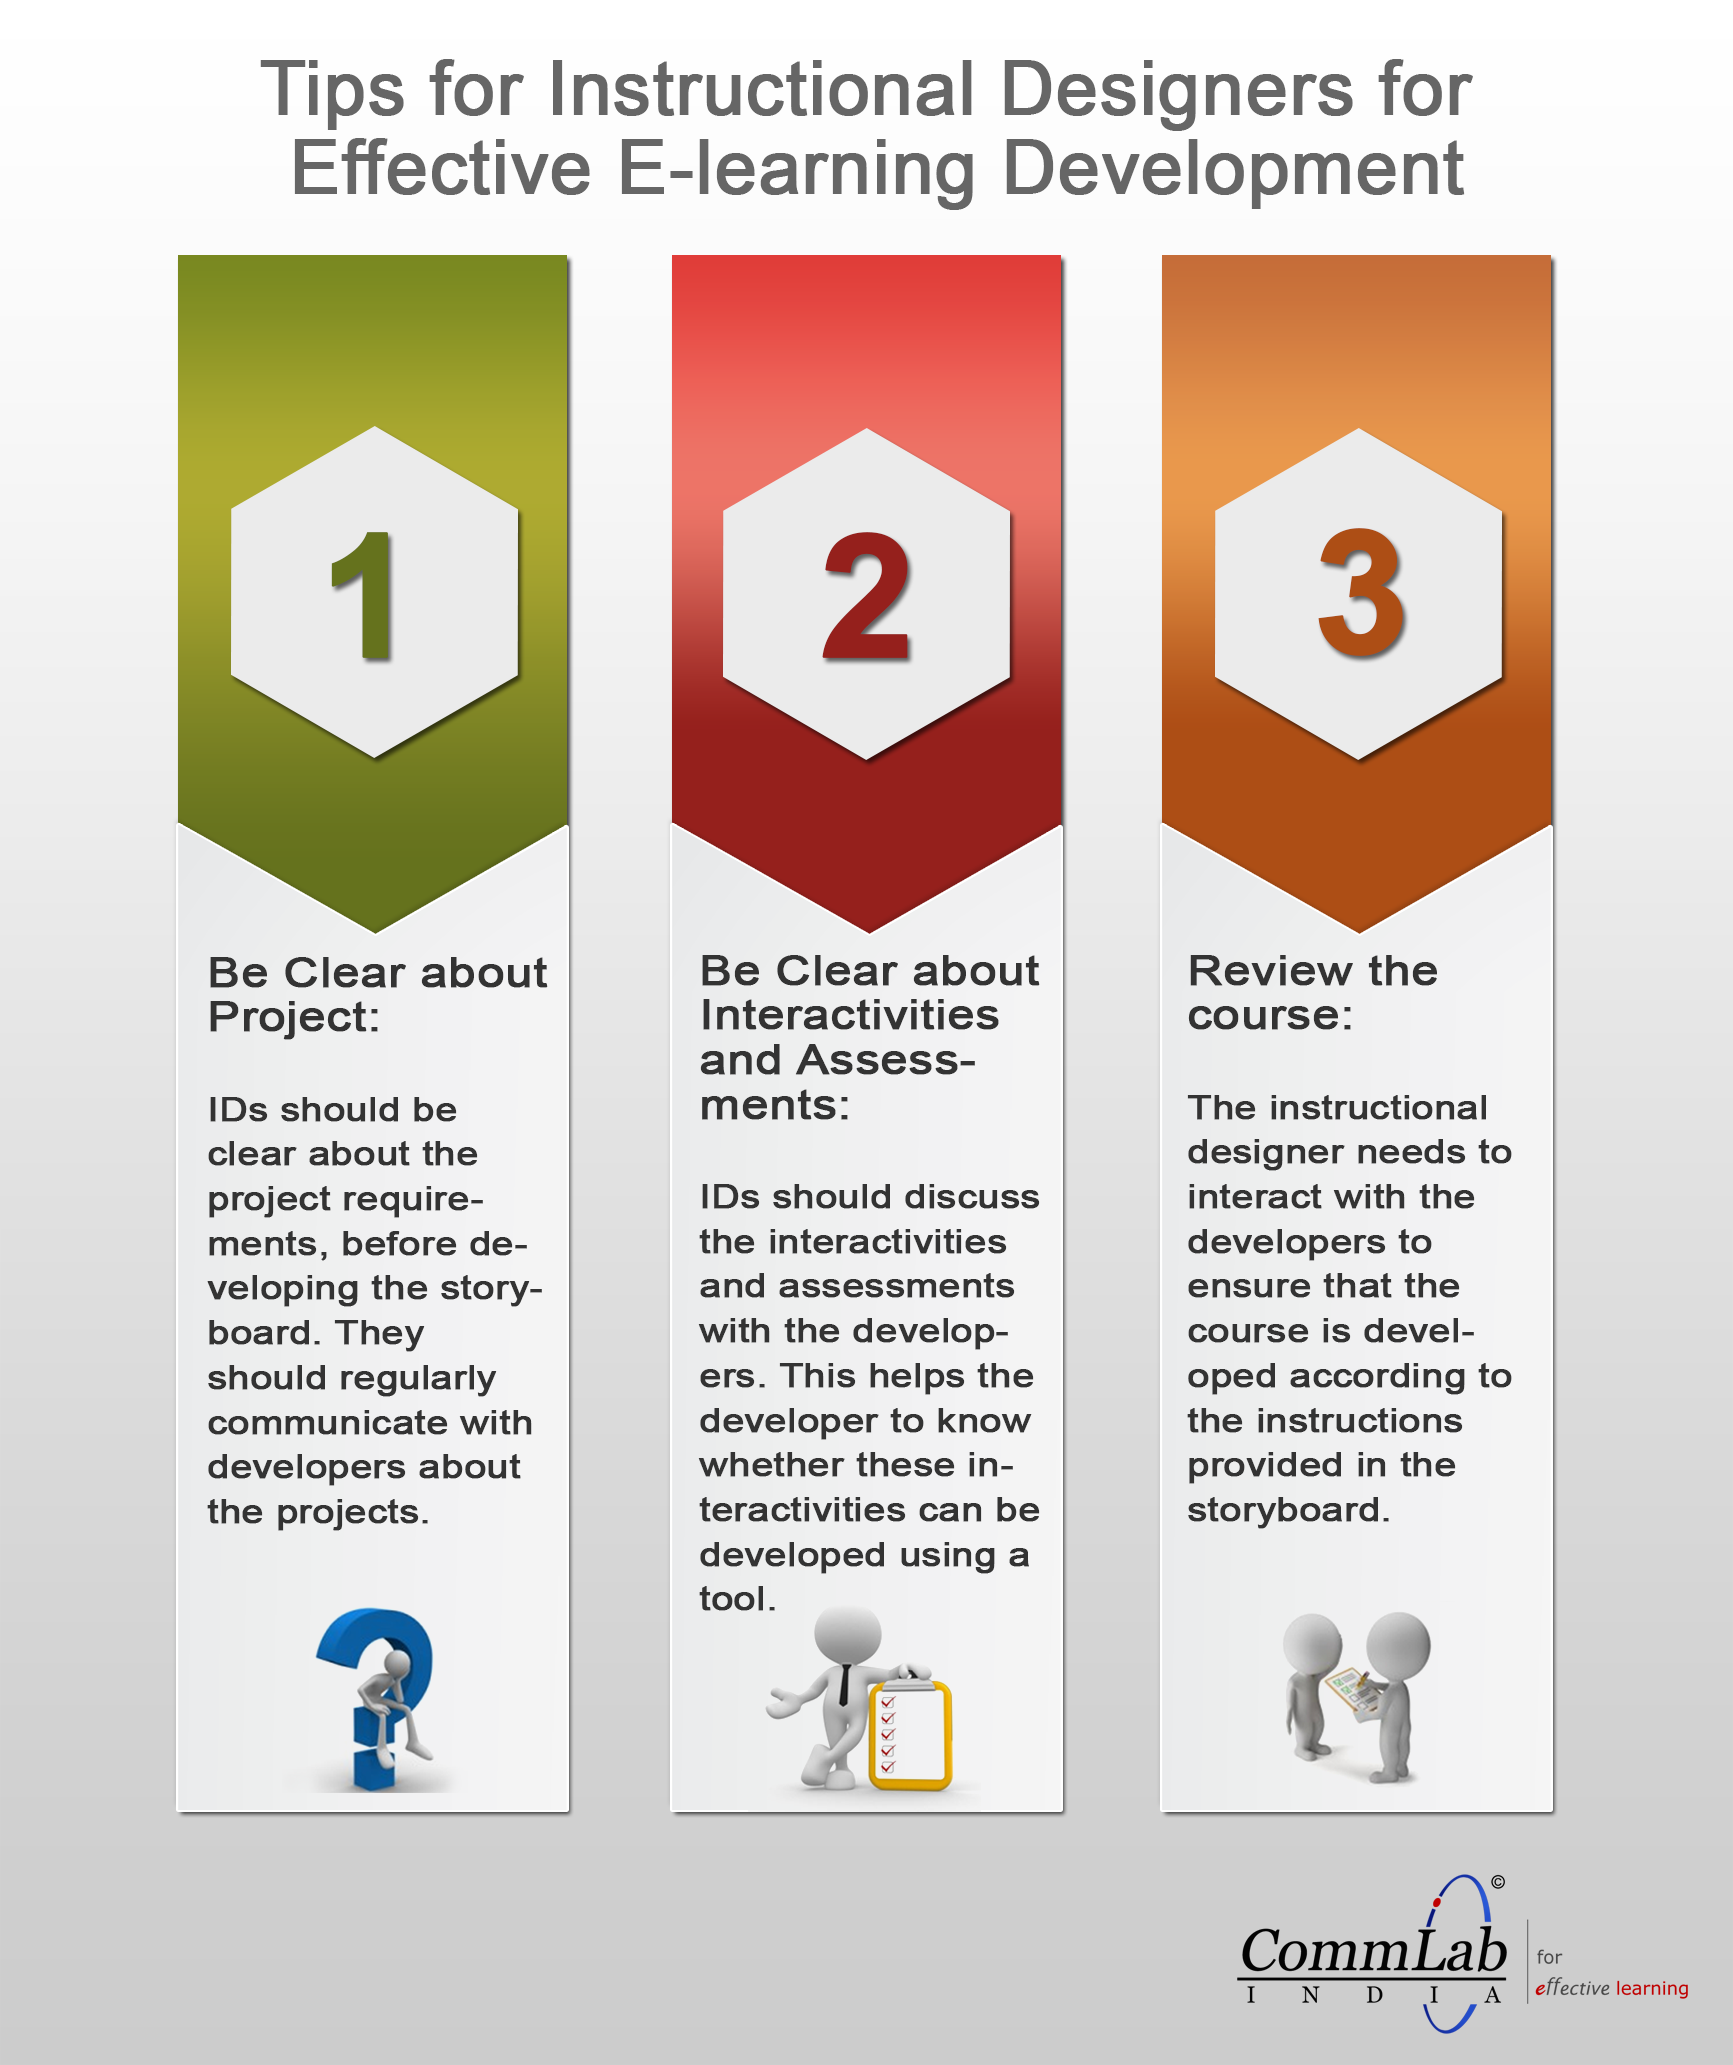 3 Tips to Instructional Designers for Effective E-learning [Infographic]